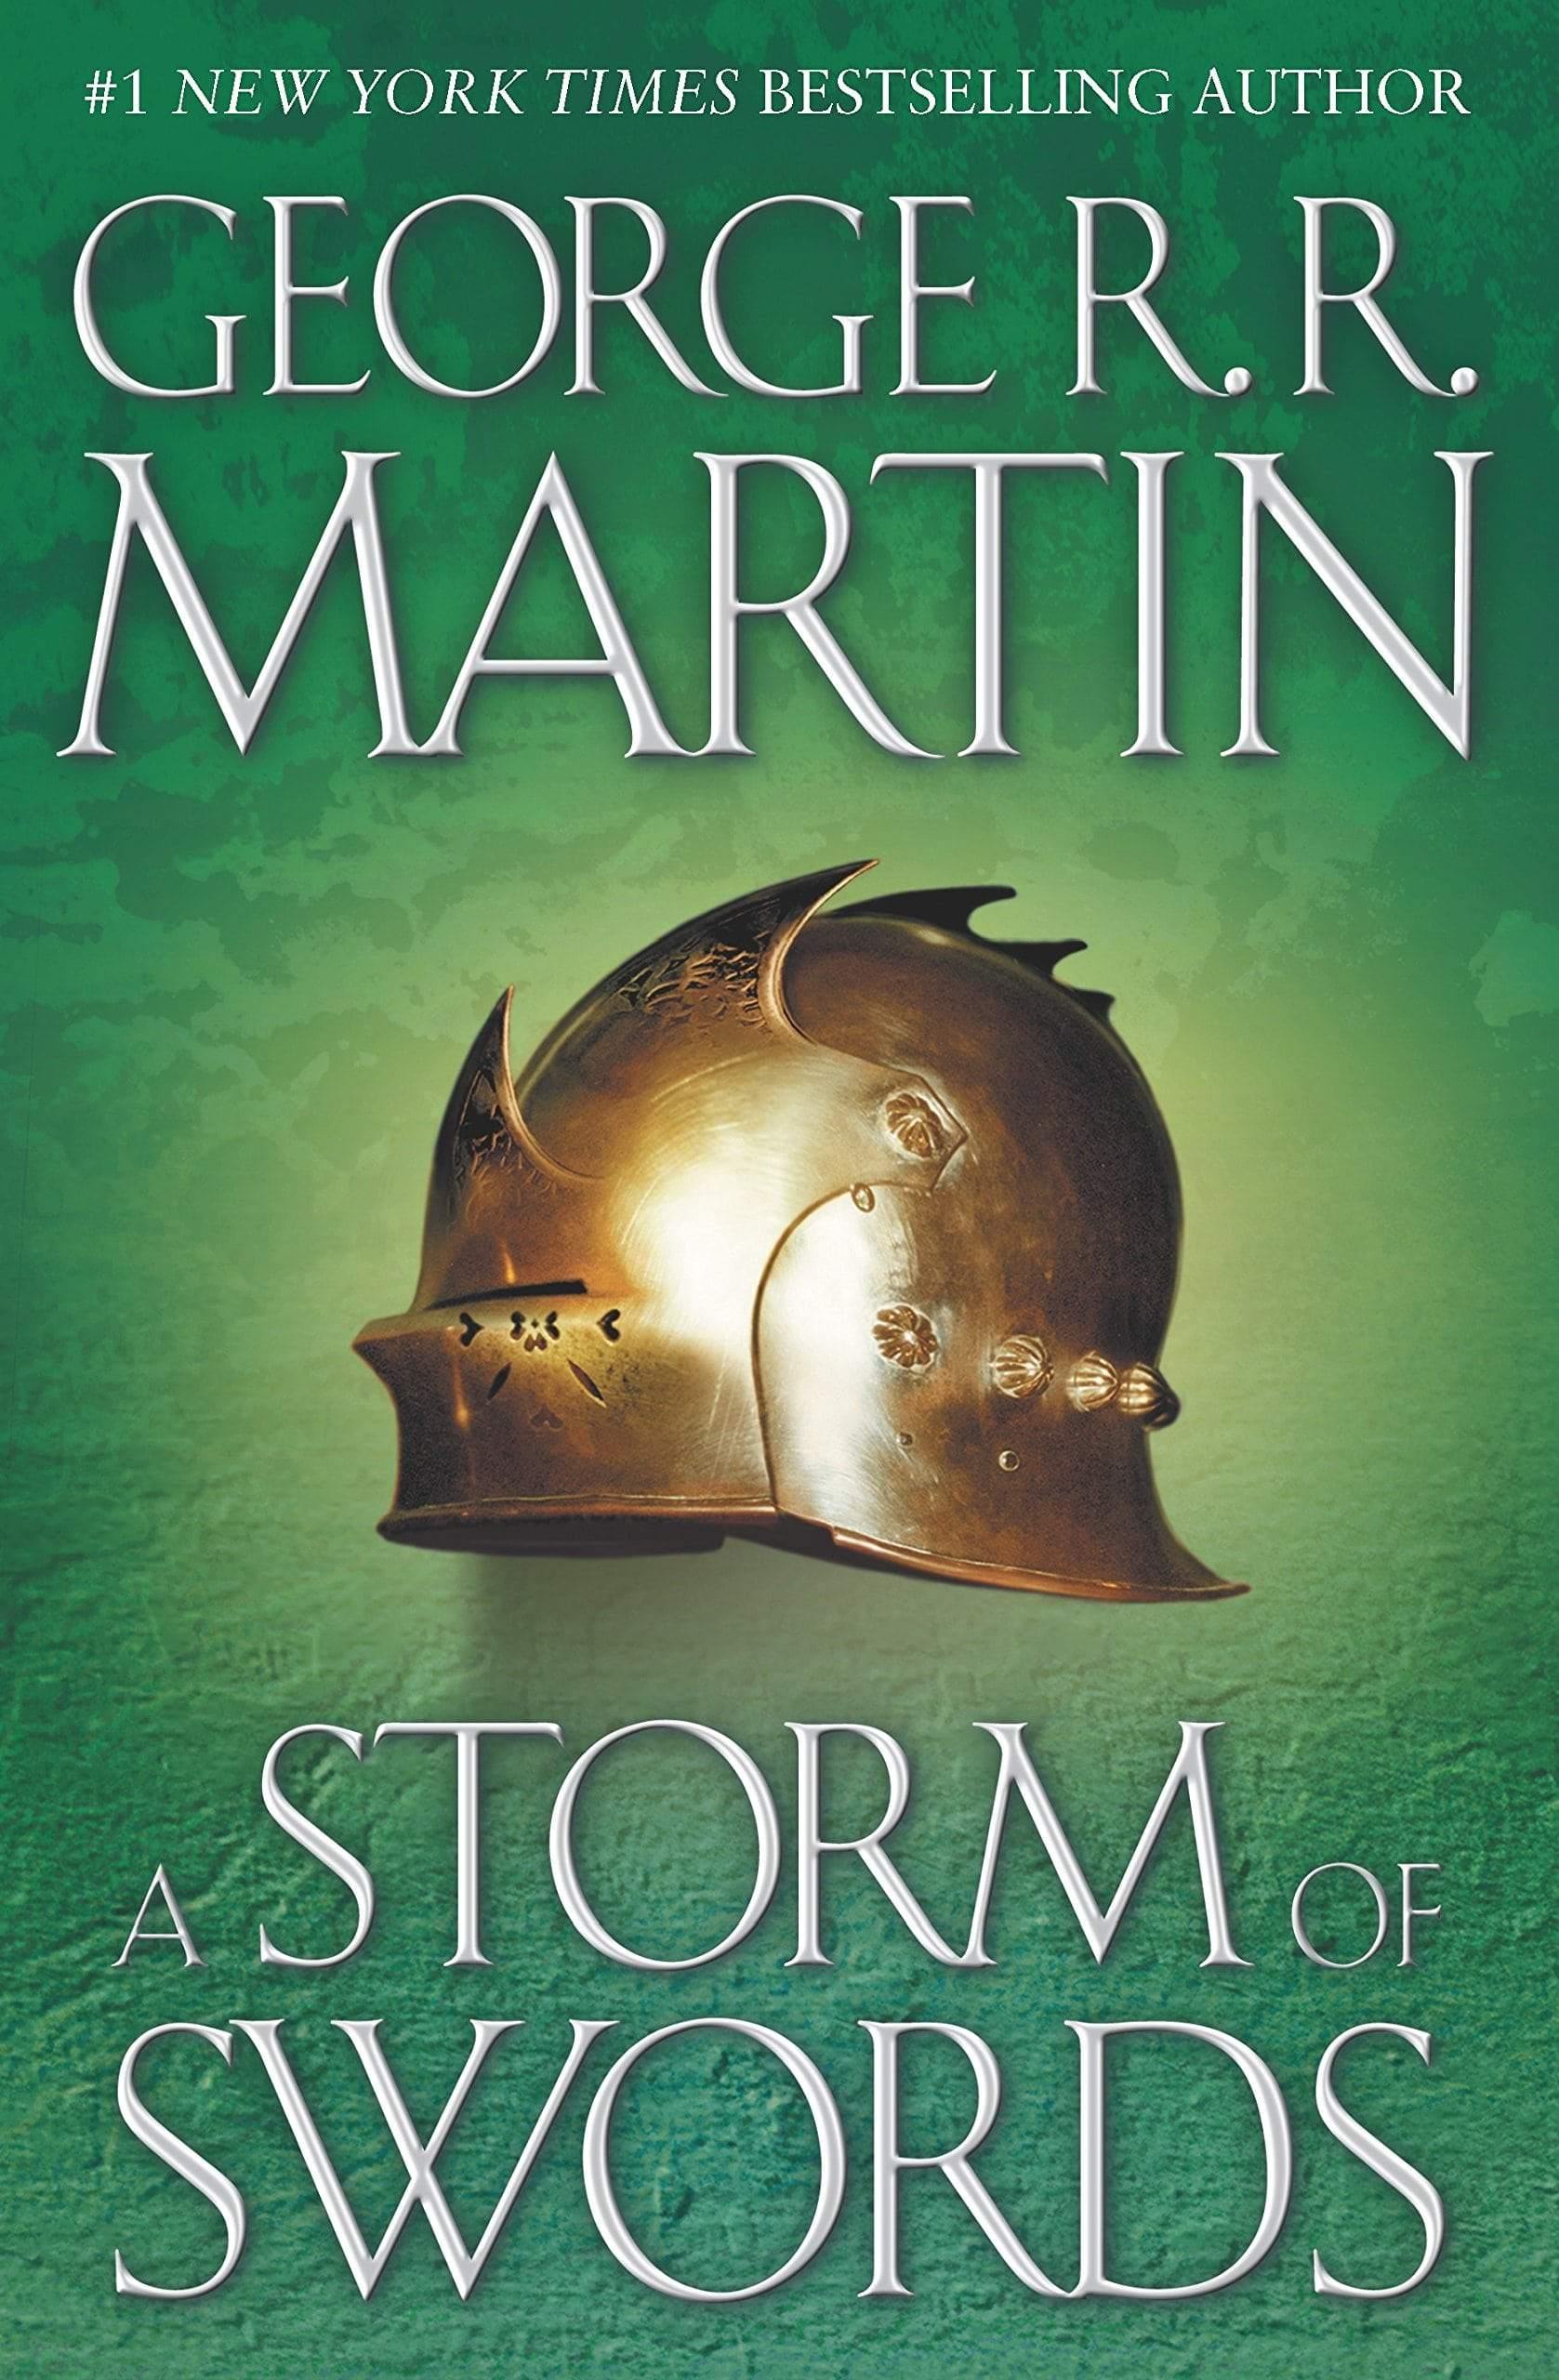 A Storm of Swords (A Song of Ice and Fire #3) - Booksondemand